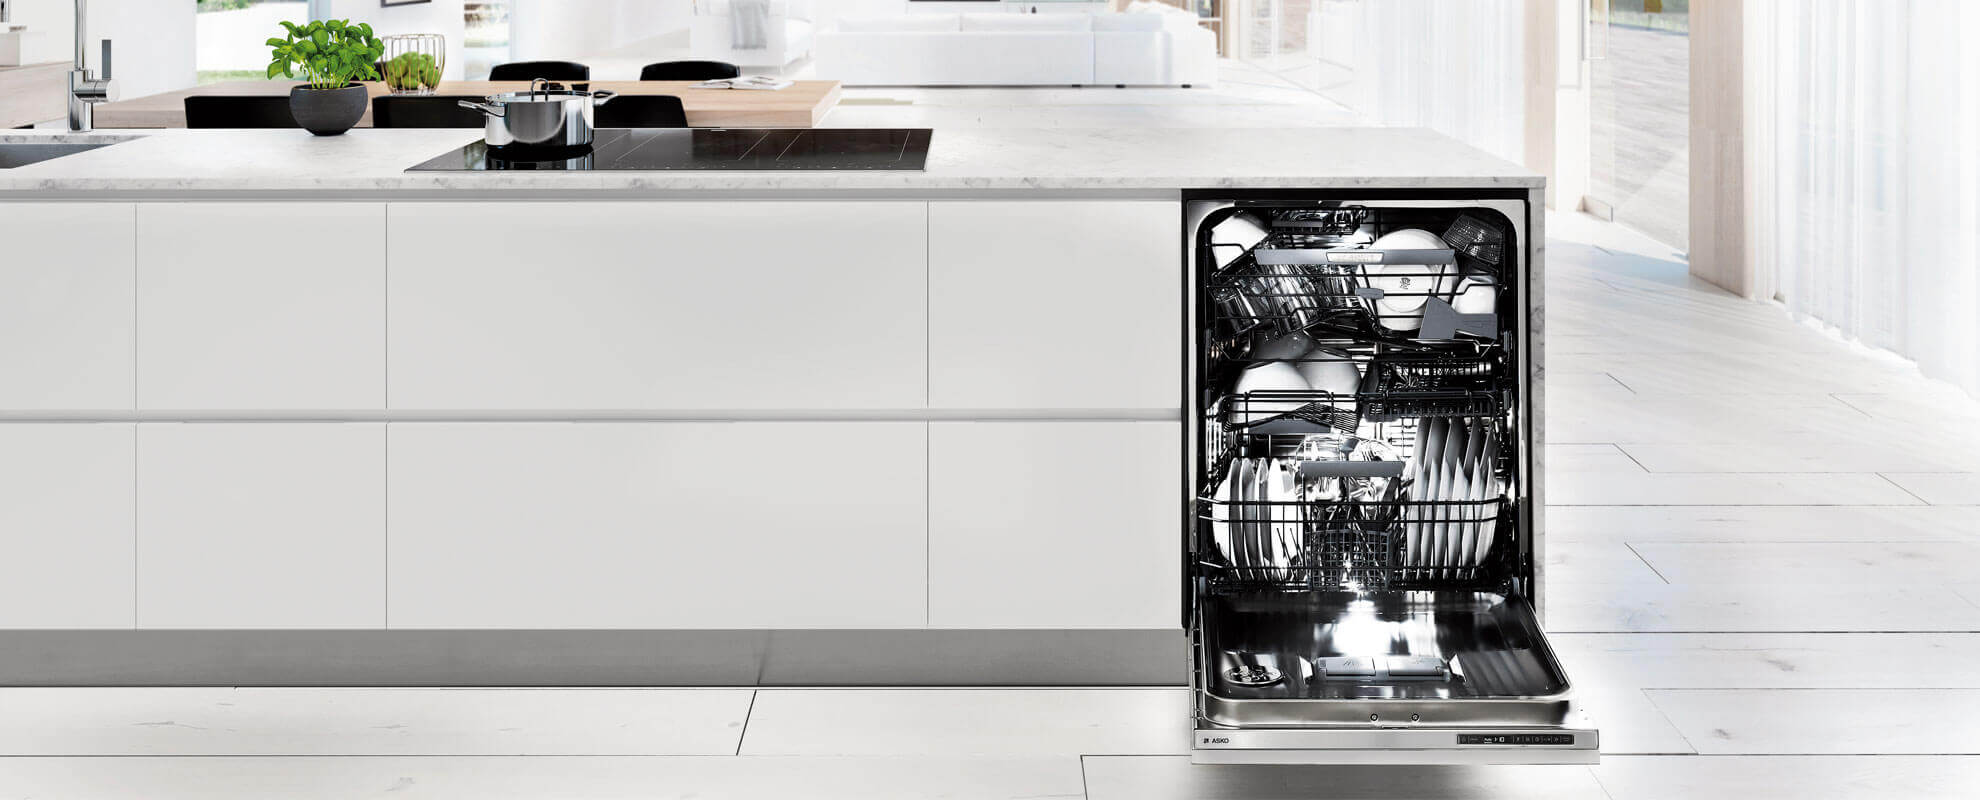 dishwasher-photo-and-guides-dishwasher-space-dimensions